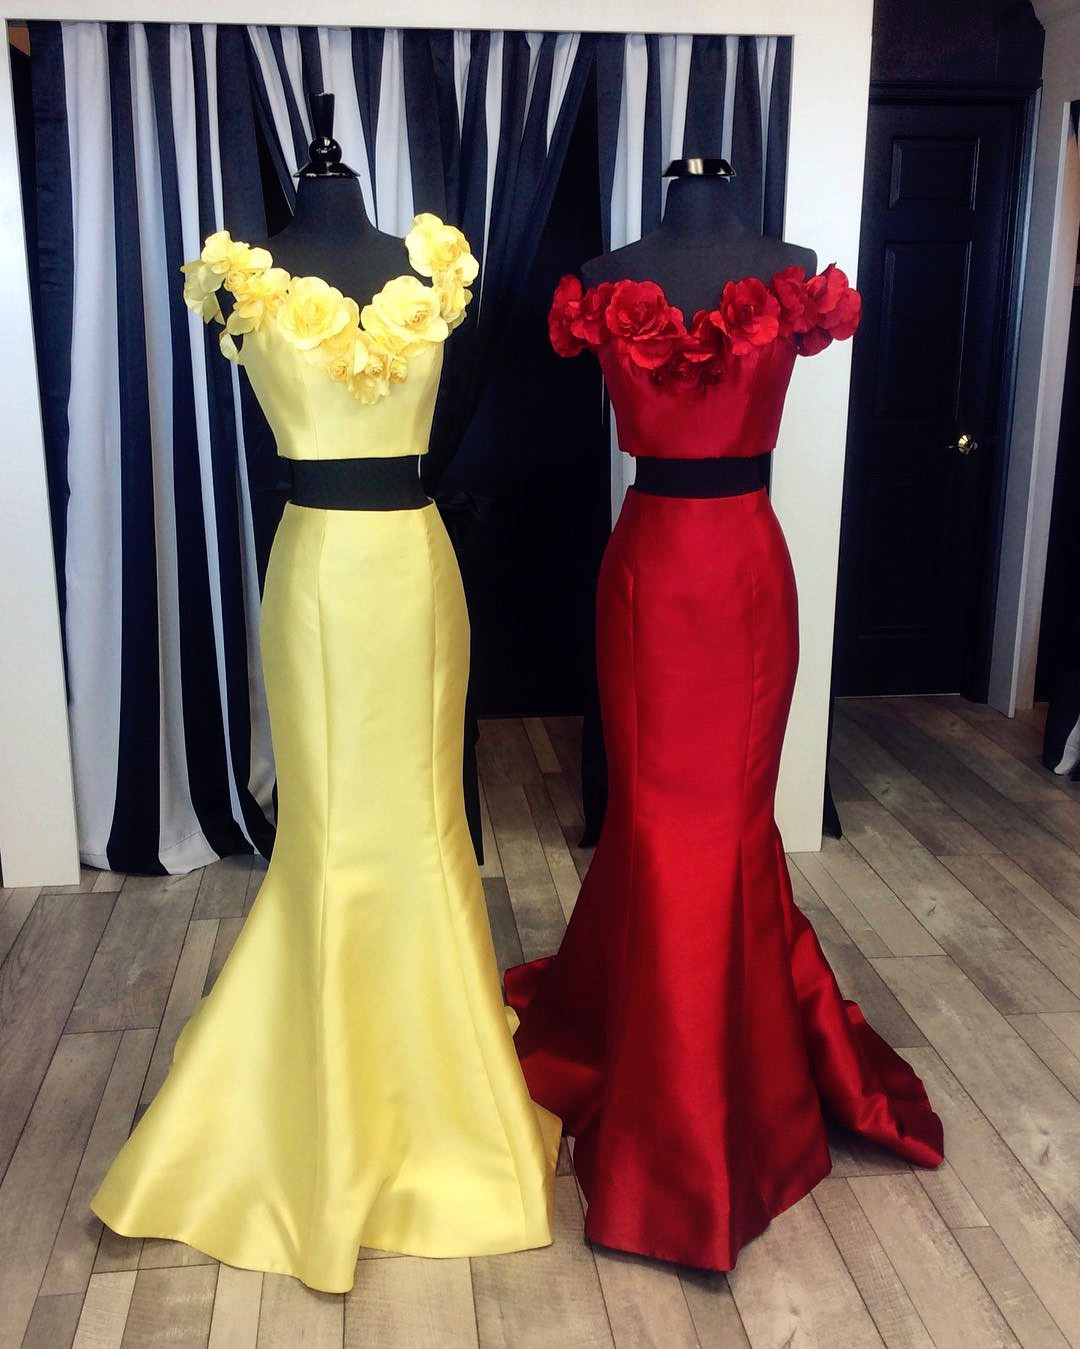 Two Piece Prom Dresses,satin Prom Gowns,flower Prom Dress,sexy Long Party Dress,off The Shoulder Dress,elegant Prom Dress 2017,mermaid Prom Dress